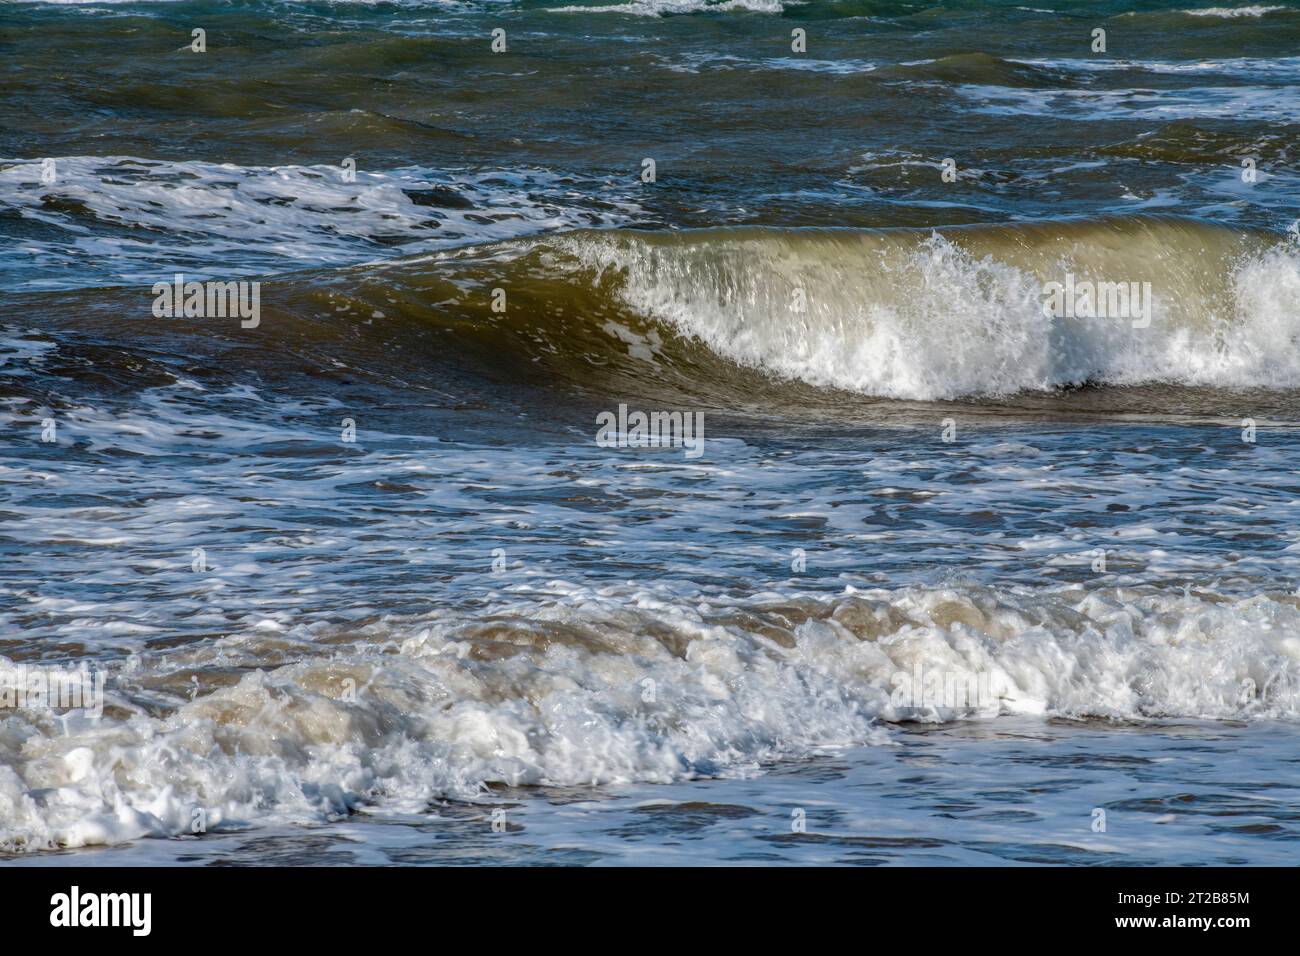 close-up of rough sea with waves breaking on the shoreline. large waves on a stormy day at sea in rough weather. Stock Photo